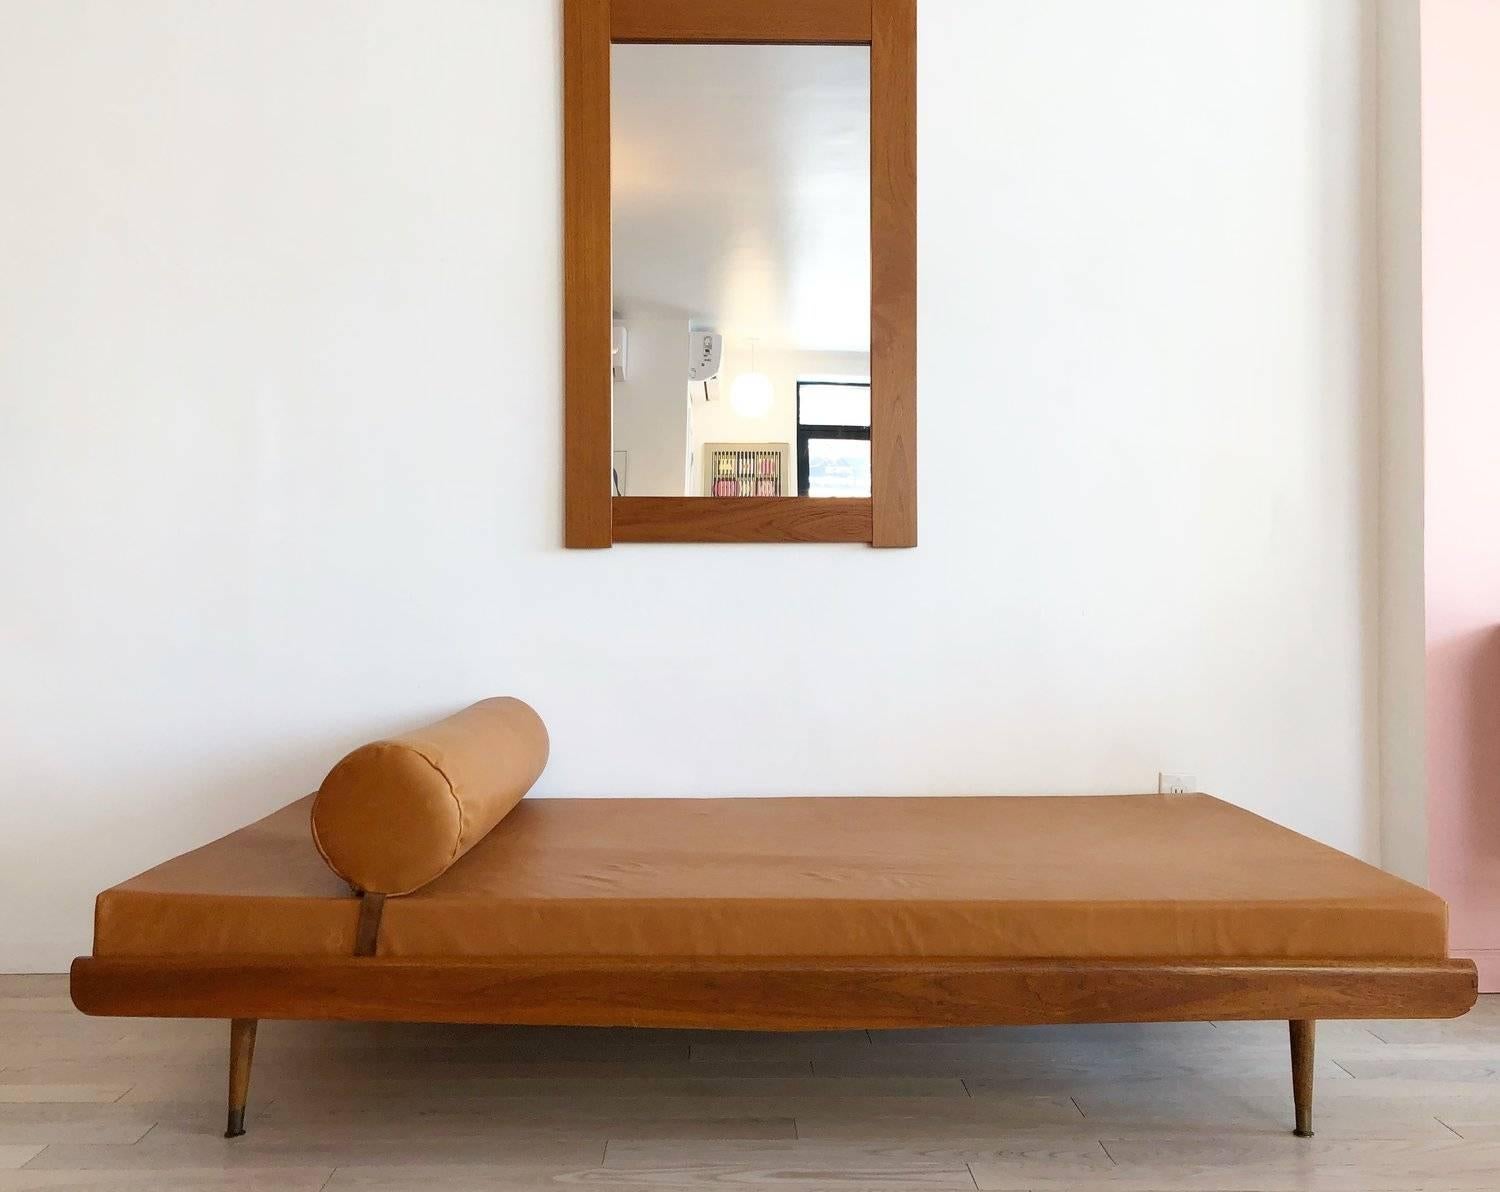 Stunning midcentury daybed in caramel colored buttery soft genuine leather upholstery. New memory foam cushions. Removable bolster pillow with strap to keep secured in place. Original 1960s peg legs, can be placed straight up and down or angled.